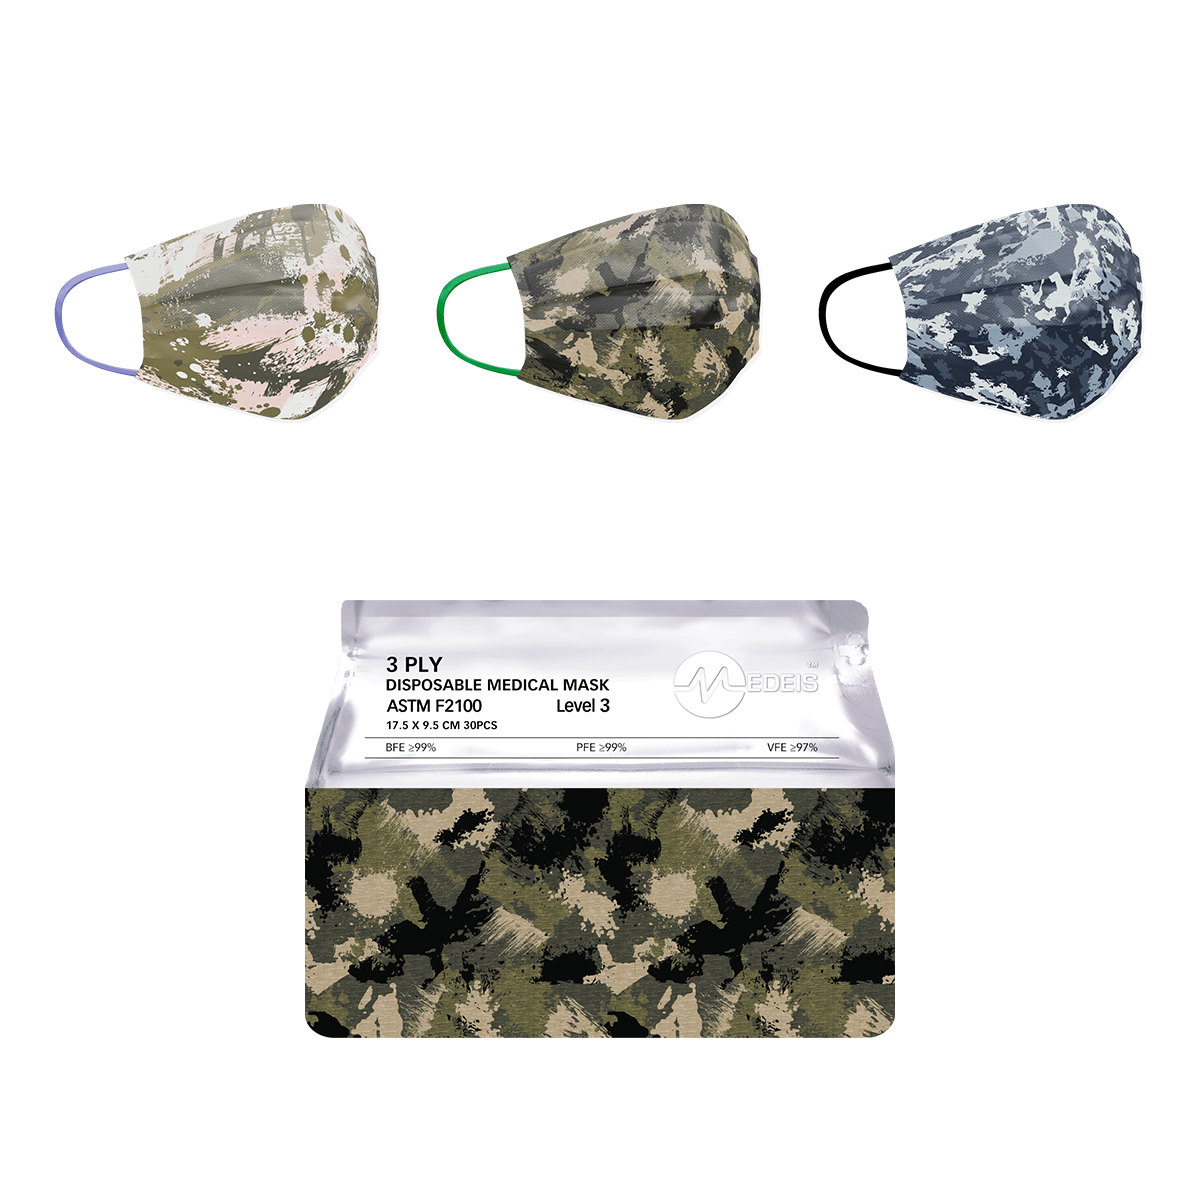 HELMS STORE Masks Camo Adults Disposable Face Masks - Bag of 30